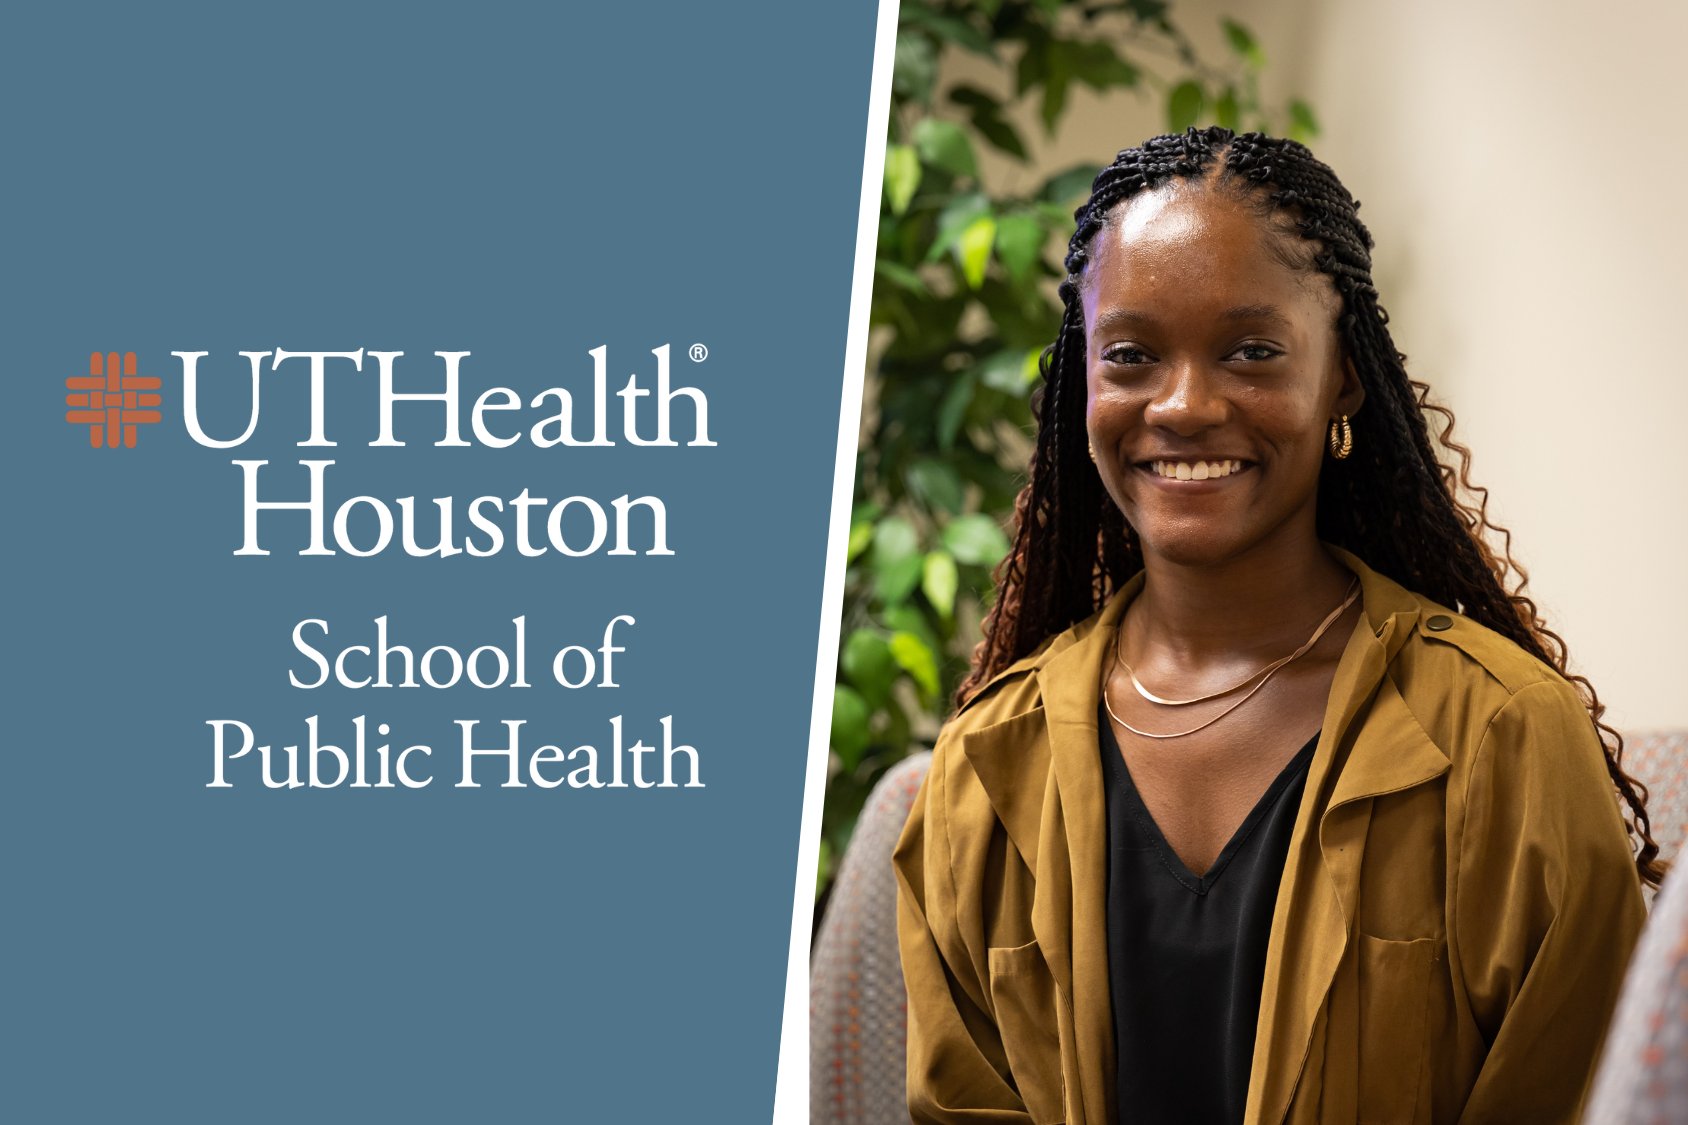 Gabrielle Haley is an MPH student at UTHealth Houston School of Public Health in San Antonio.